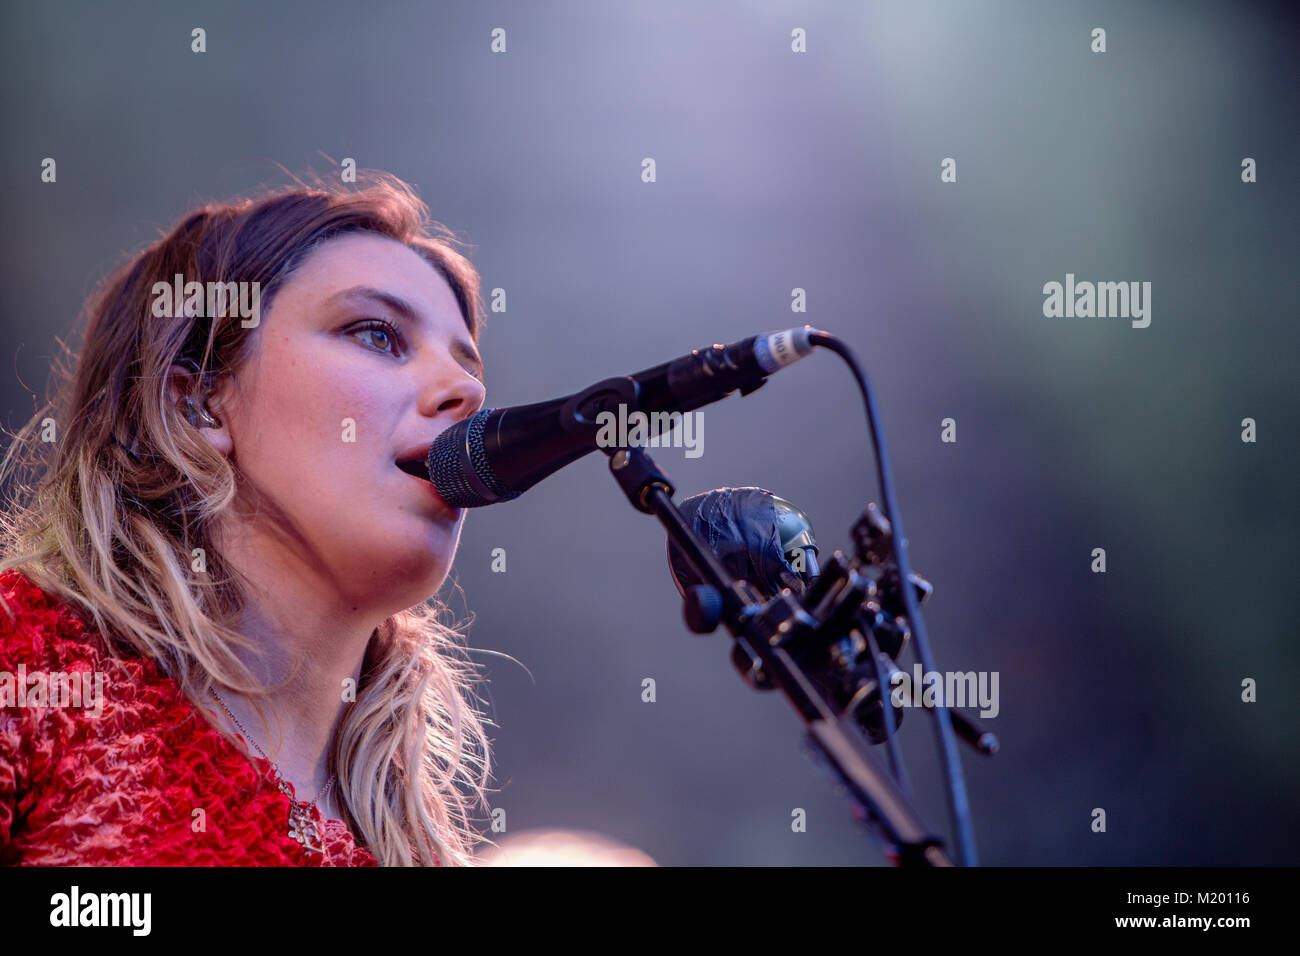 Onderdompeling Actuator huid The British alternative rock band Wolf Alice performs a live concert at the  Norwegian music festival Bergenfest 2016. Here singer and guitarist Ellie  Rowsell is seen live on stage. Norway, 16/06 2016